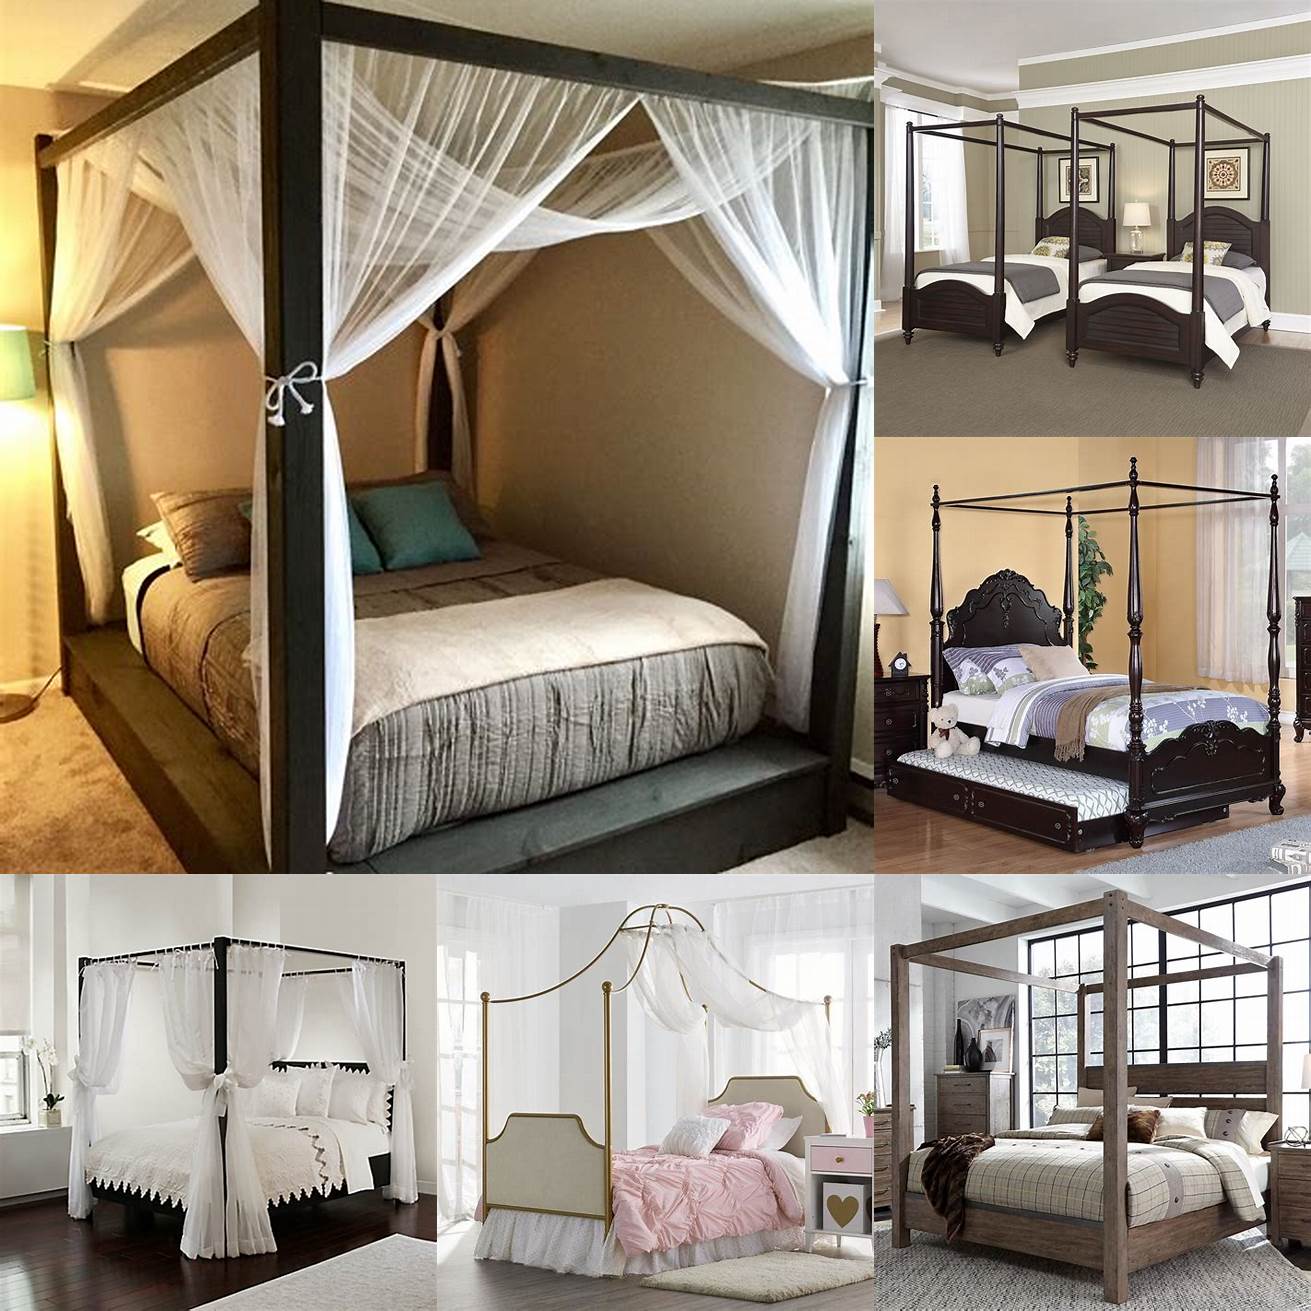 Double bed with a canopy